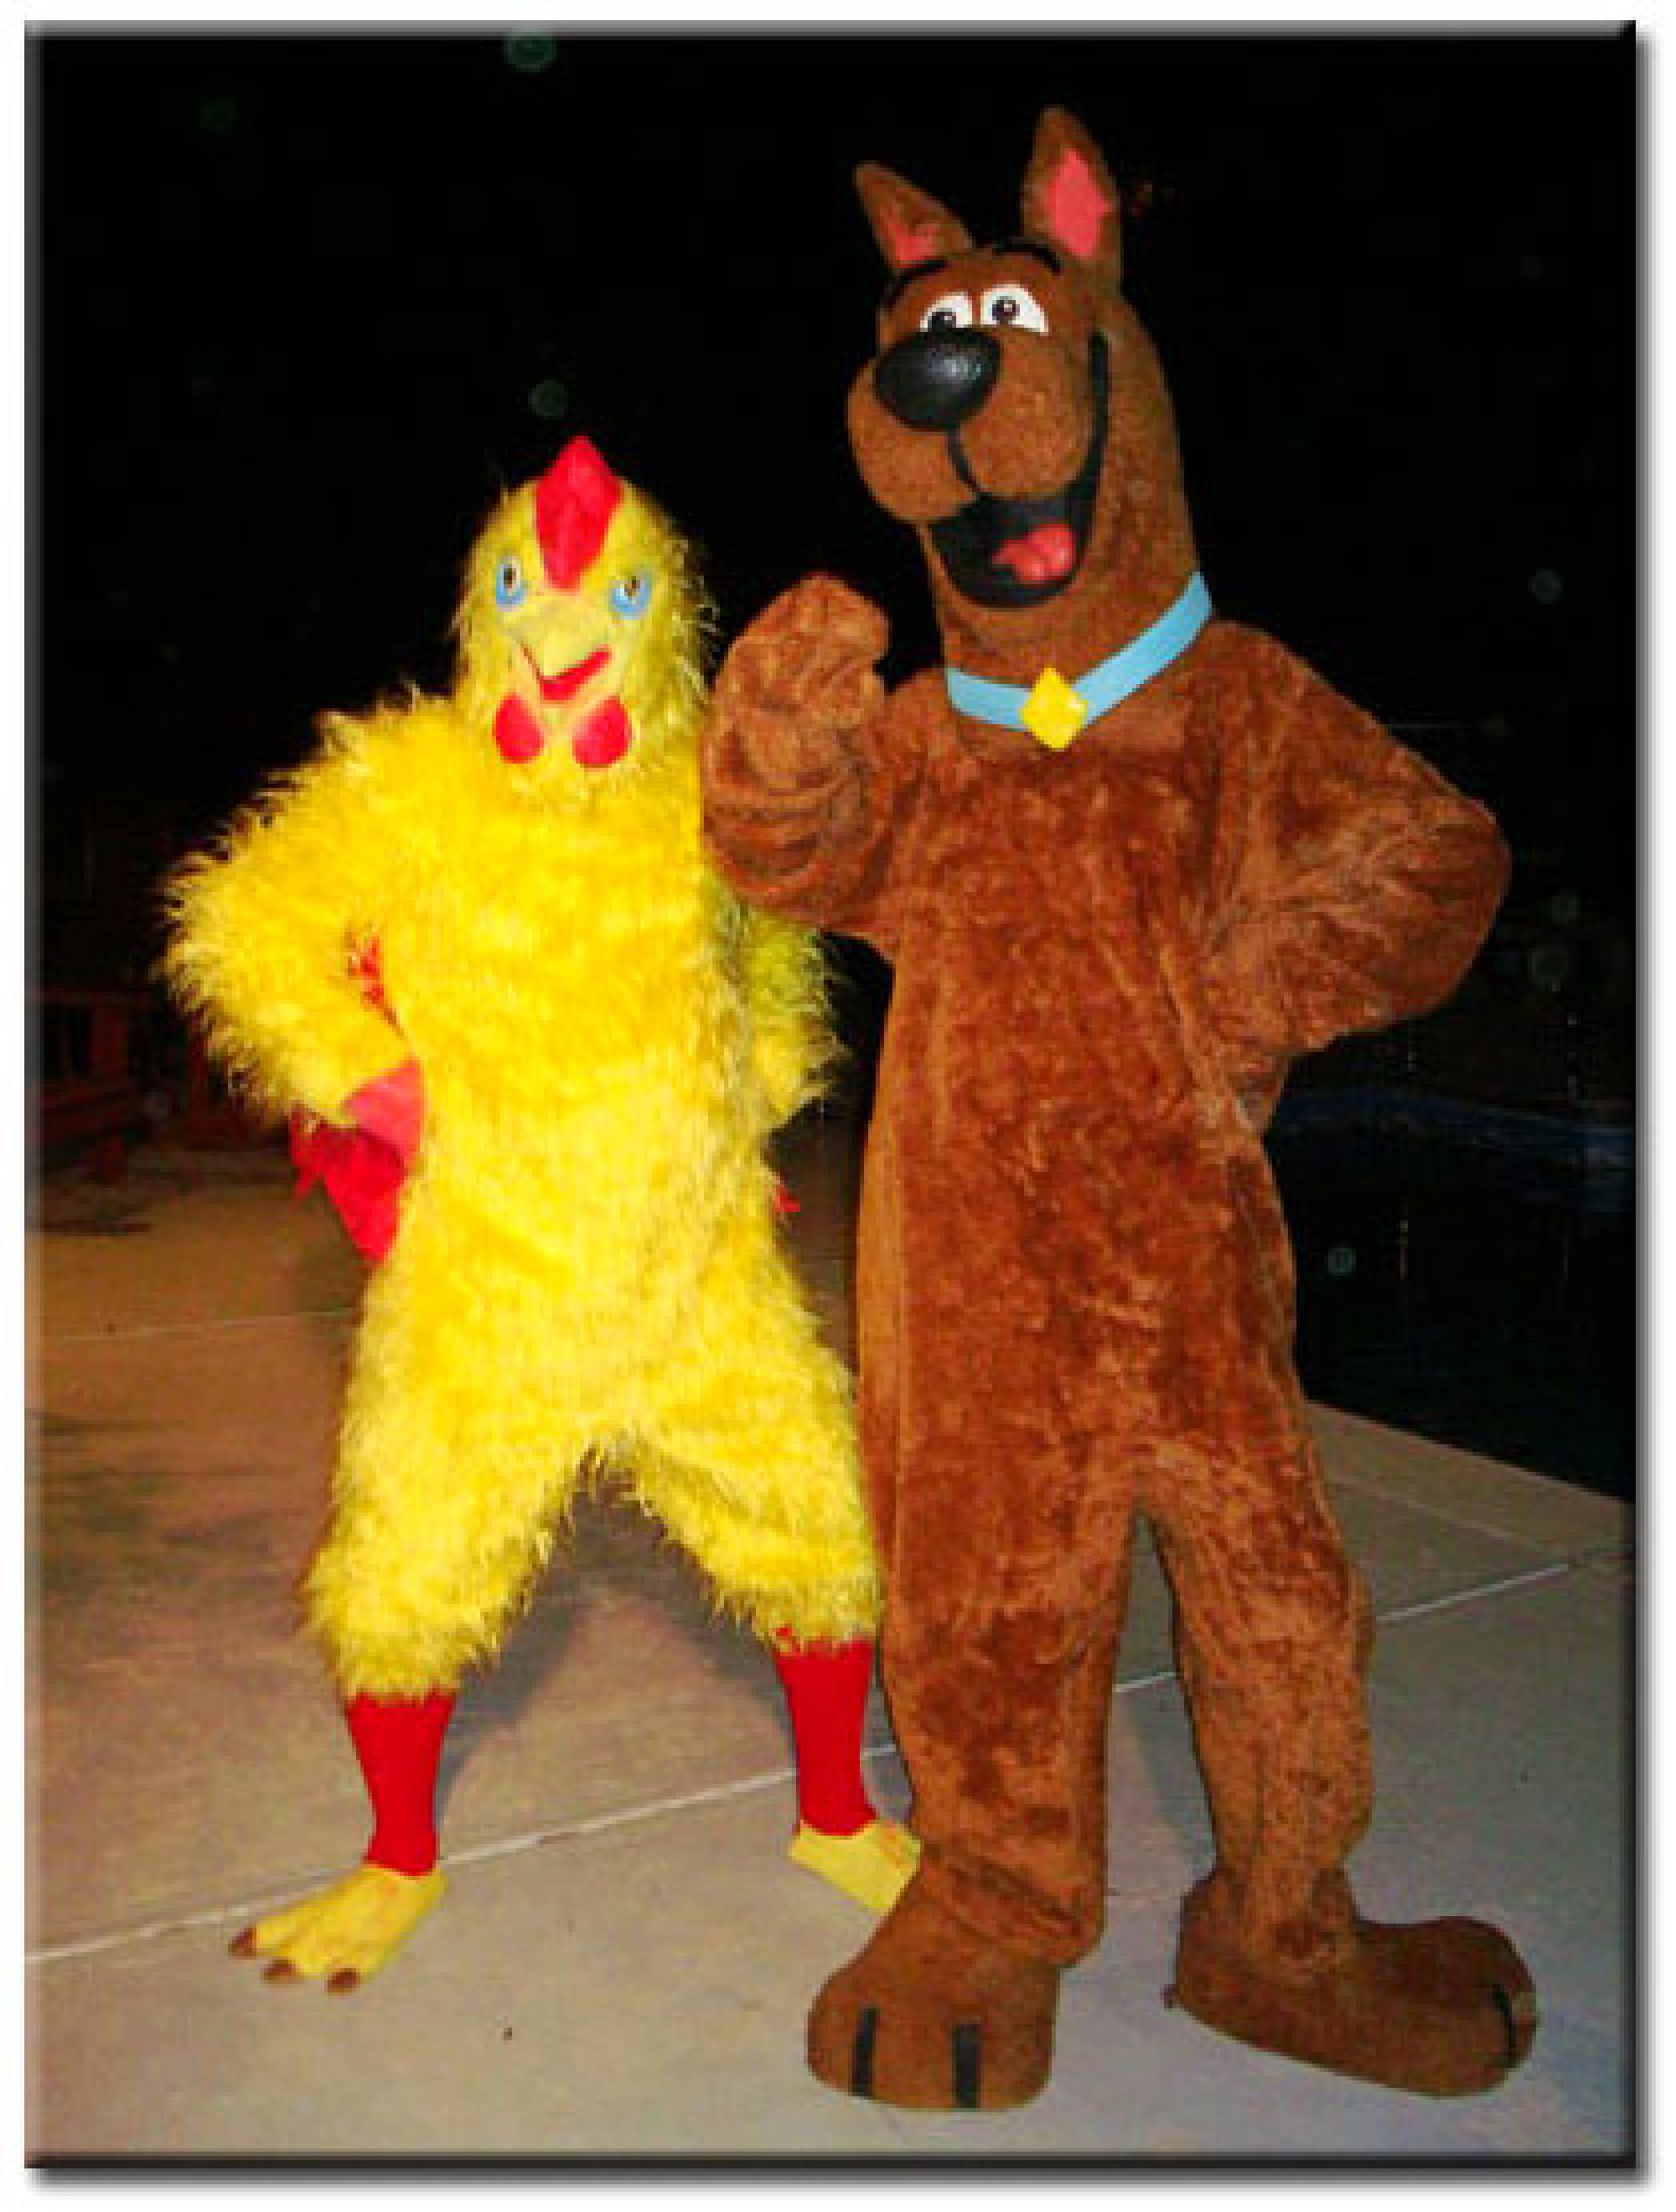 Chicken and detective dog costumed character rental in Raleigh